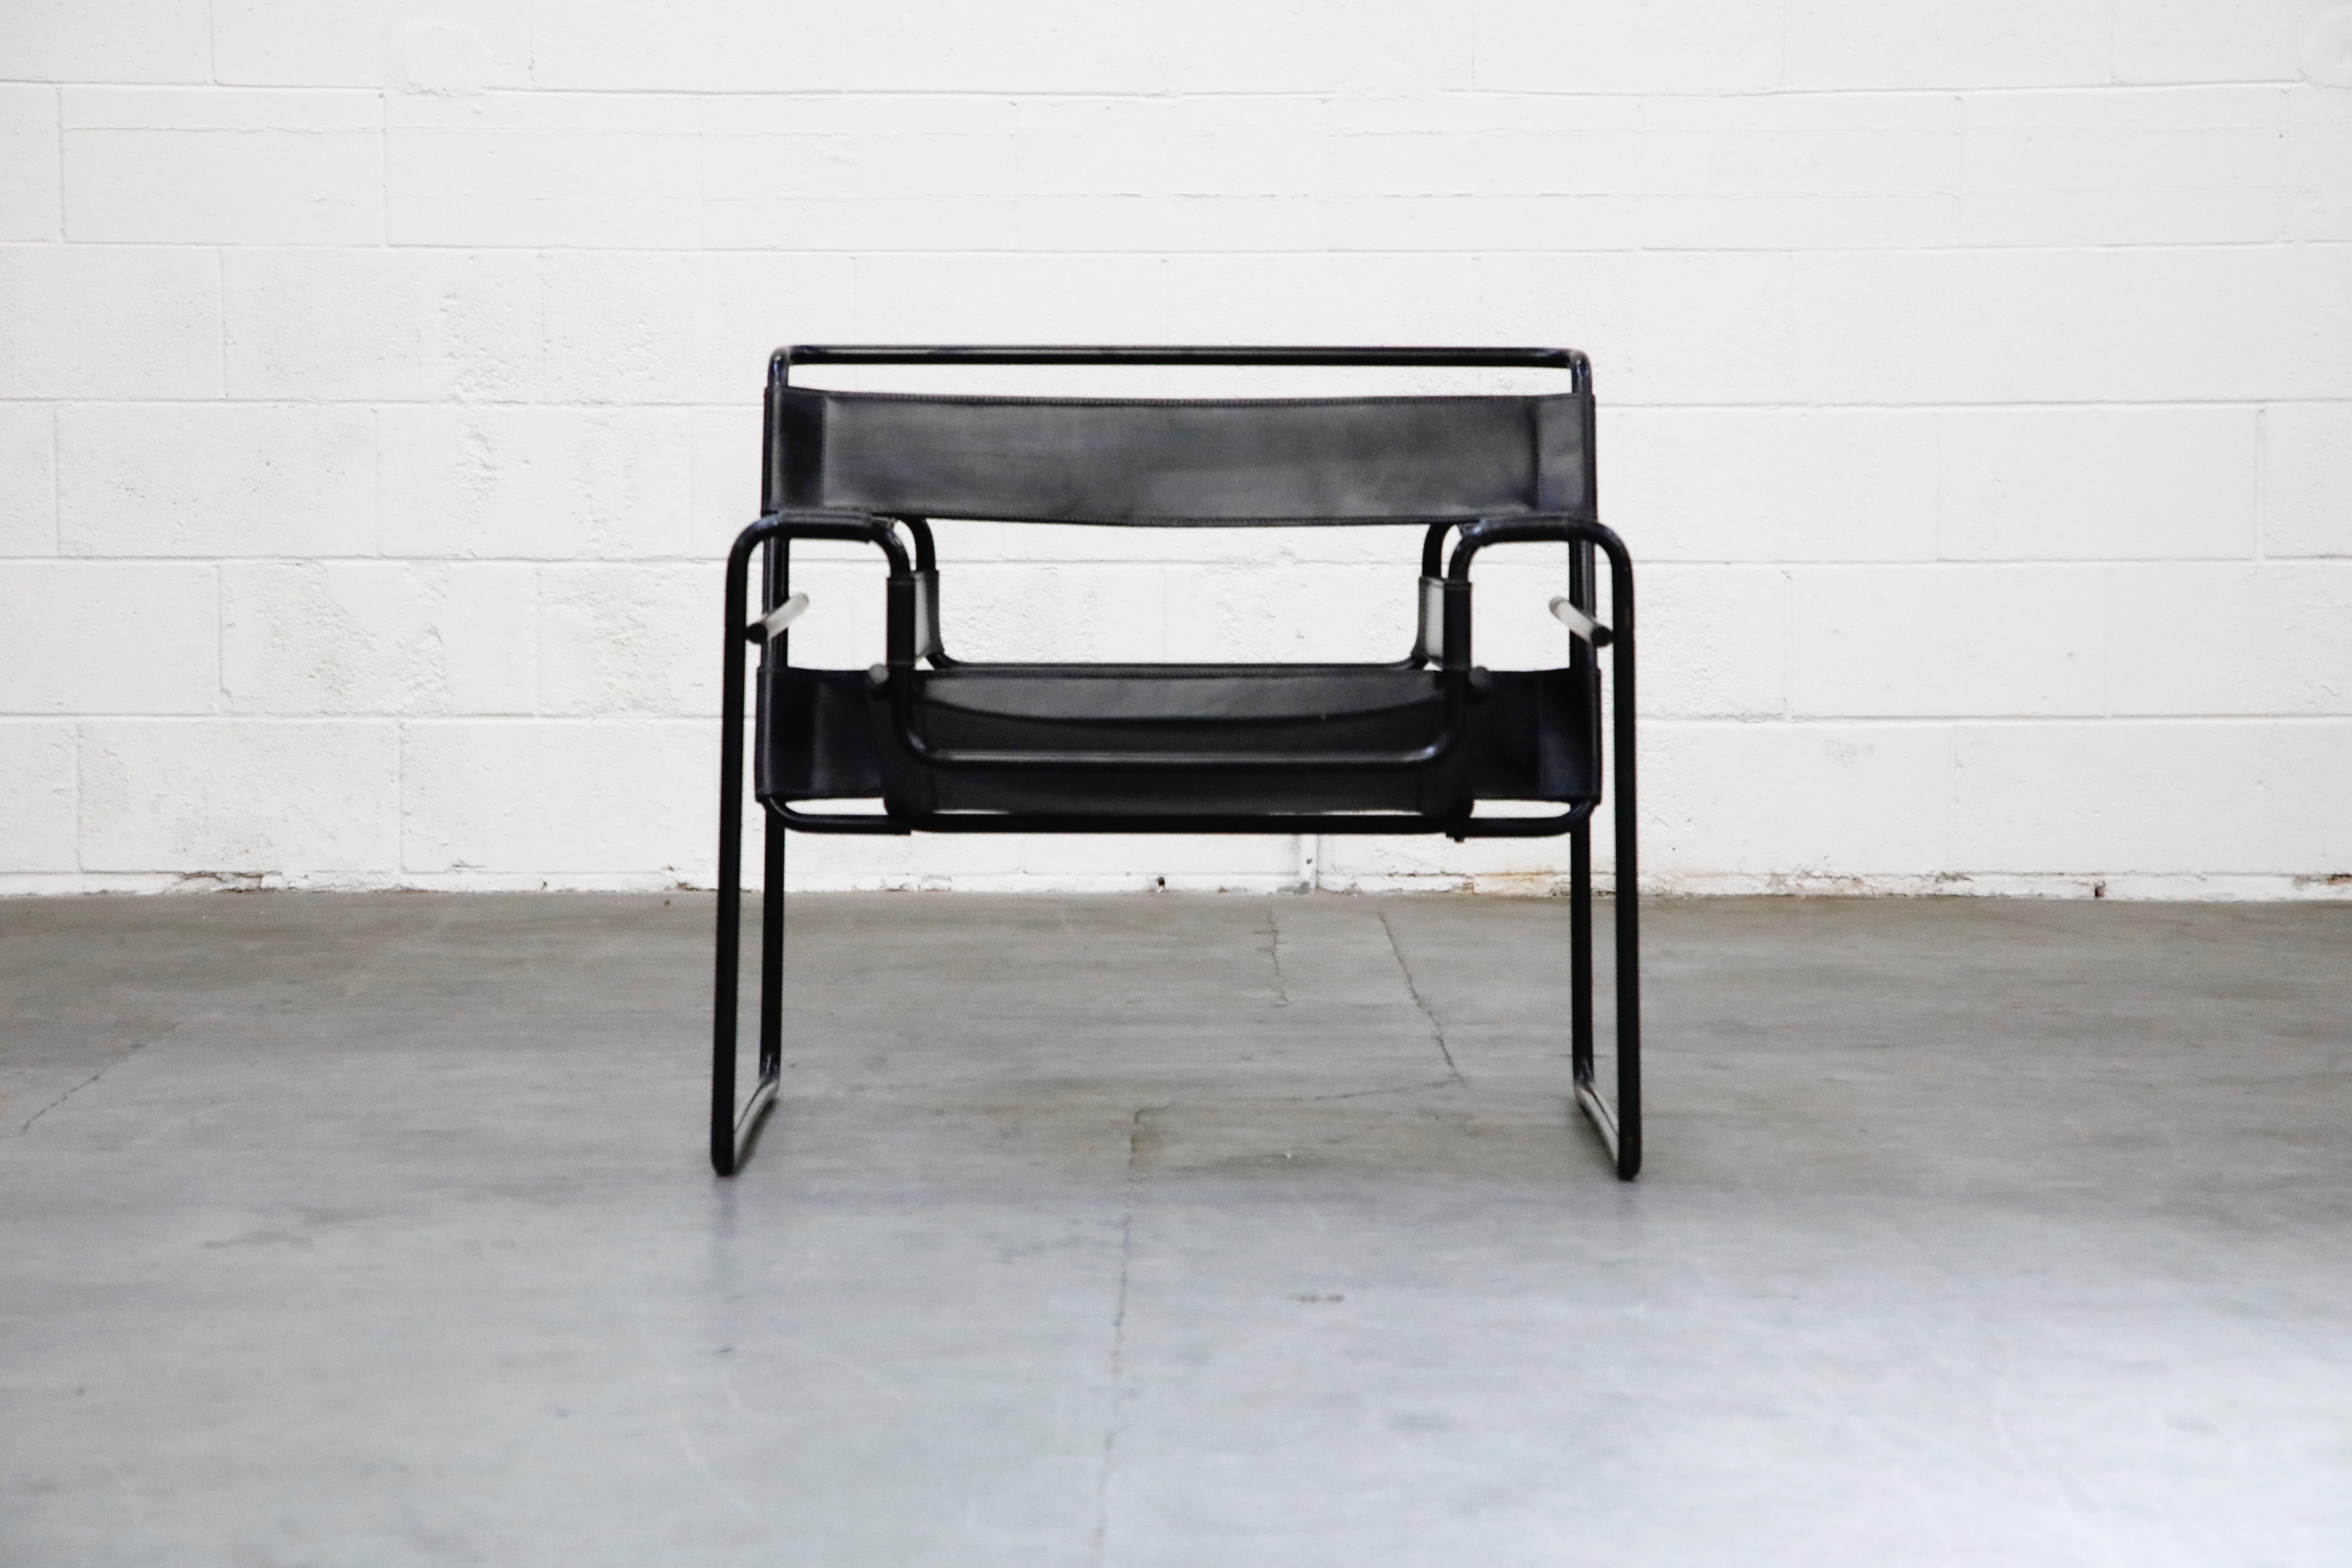 This authentic model B3 'Wassily' lounge chair by Marcel Breuer for Knoll International is a rare black on black colorway featuring a black tubular steel frame and thick black leather slings that make up the seat, arms and seat back. While many